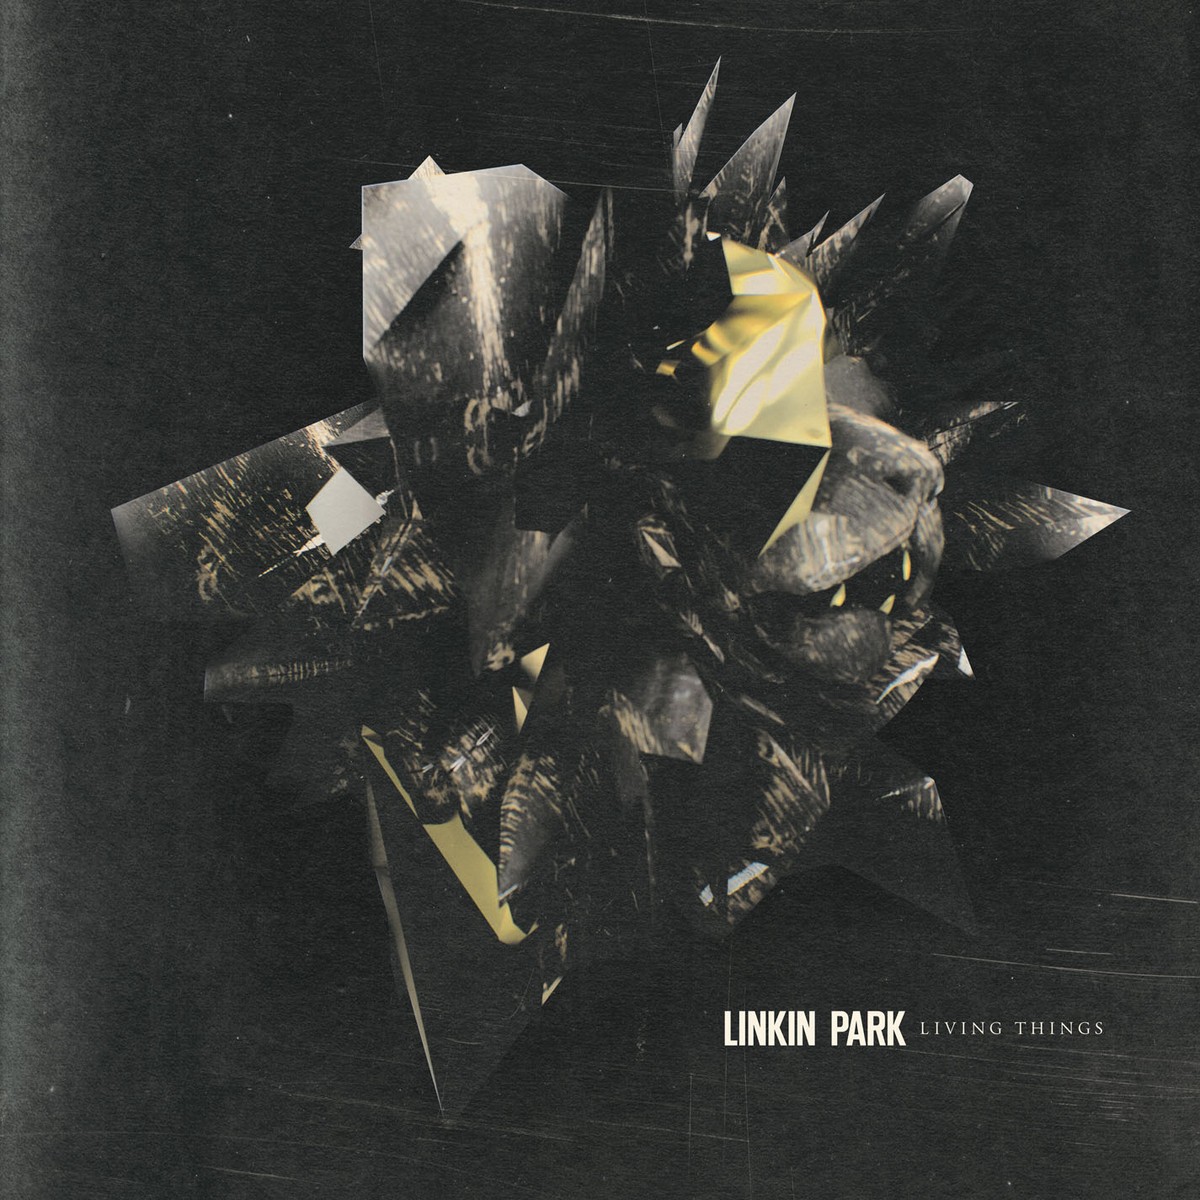 Linkin Park – Living Things